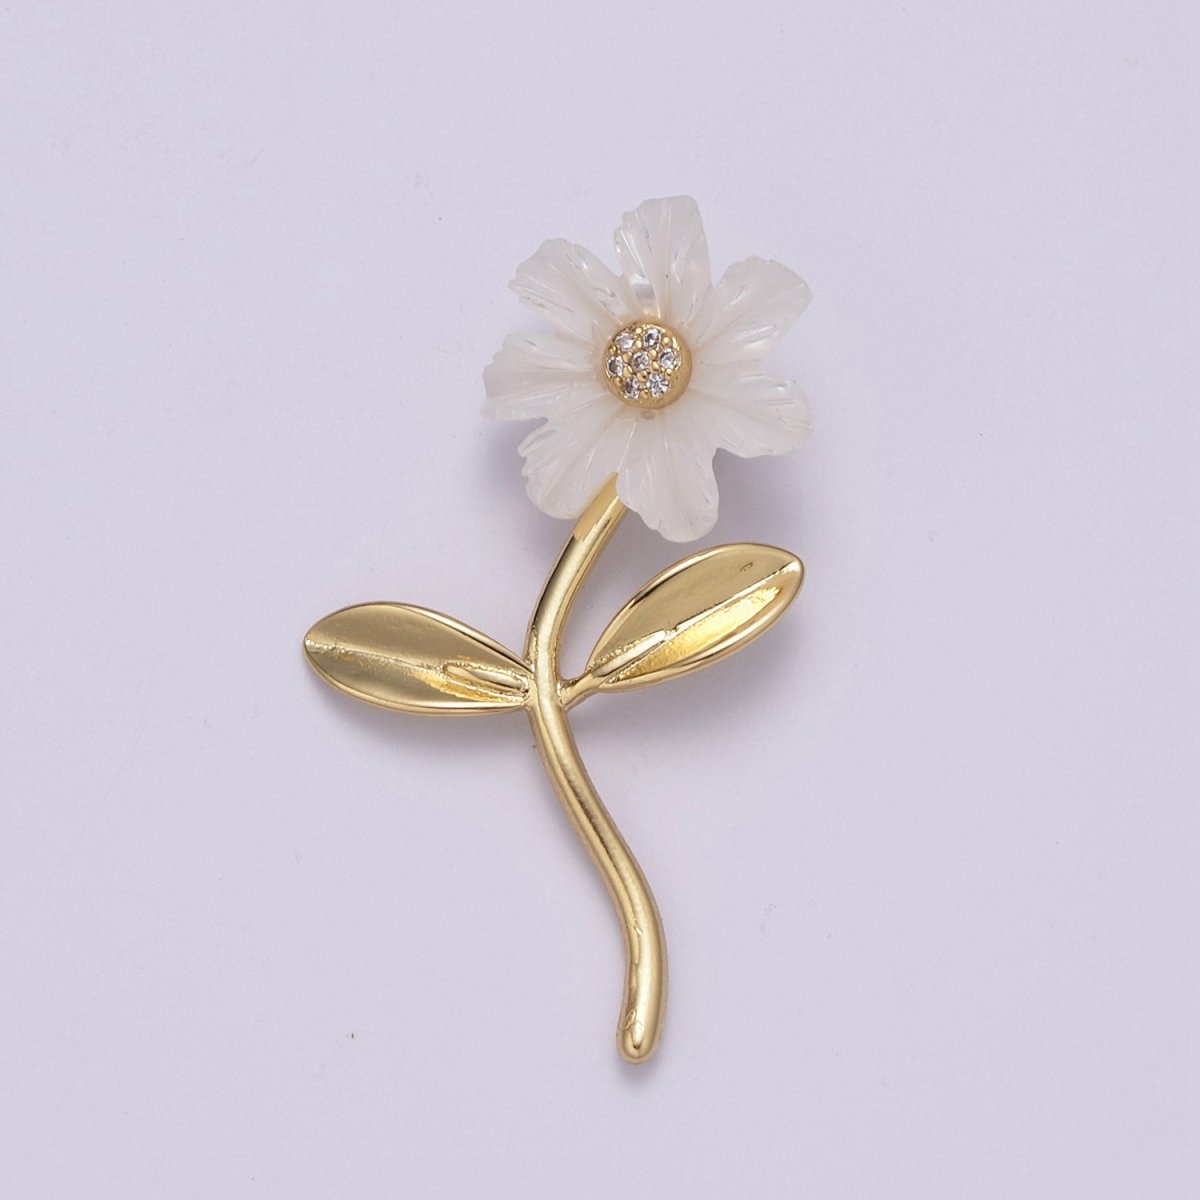 Dainty Carved Mother Pearl White Daisy Flower Charm Elegant Minimalist Floral Charm for Necklace Supply N-528 - DLUXCA